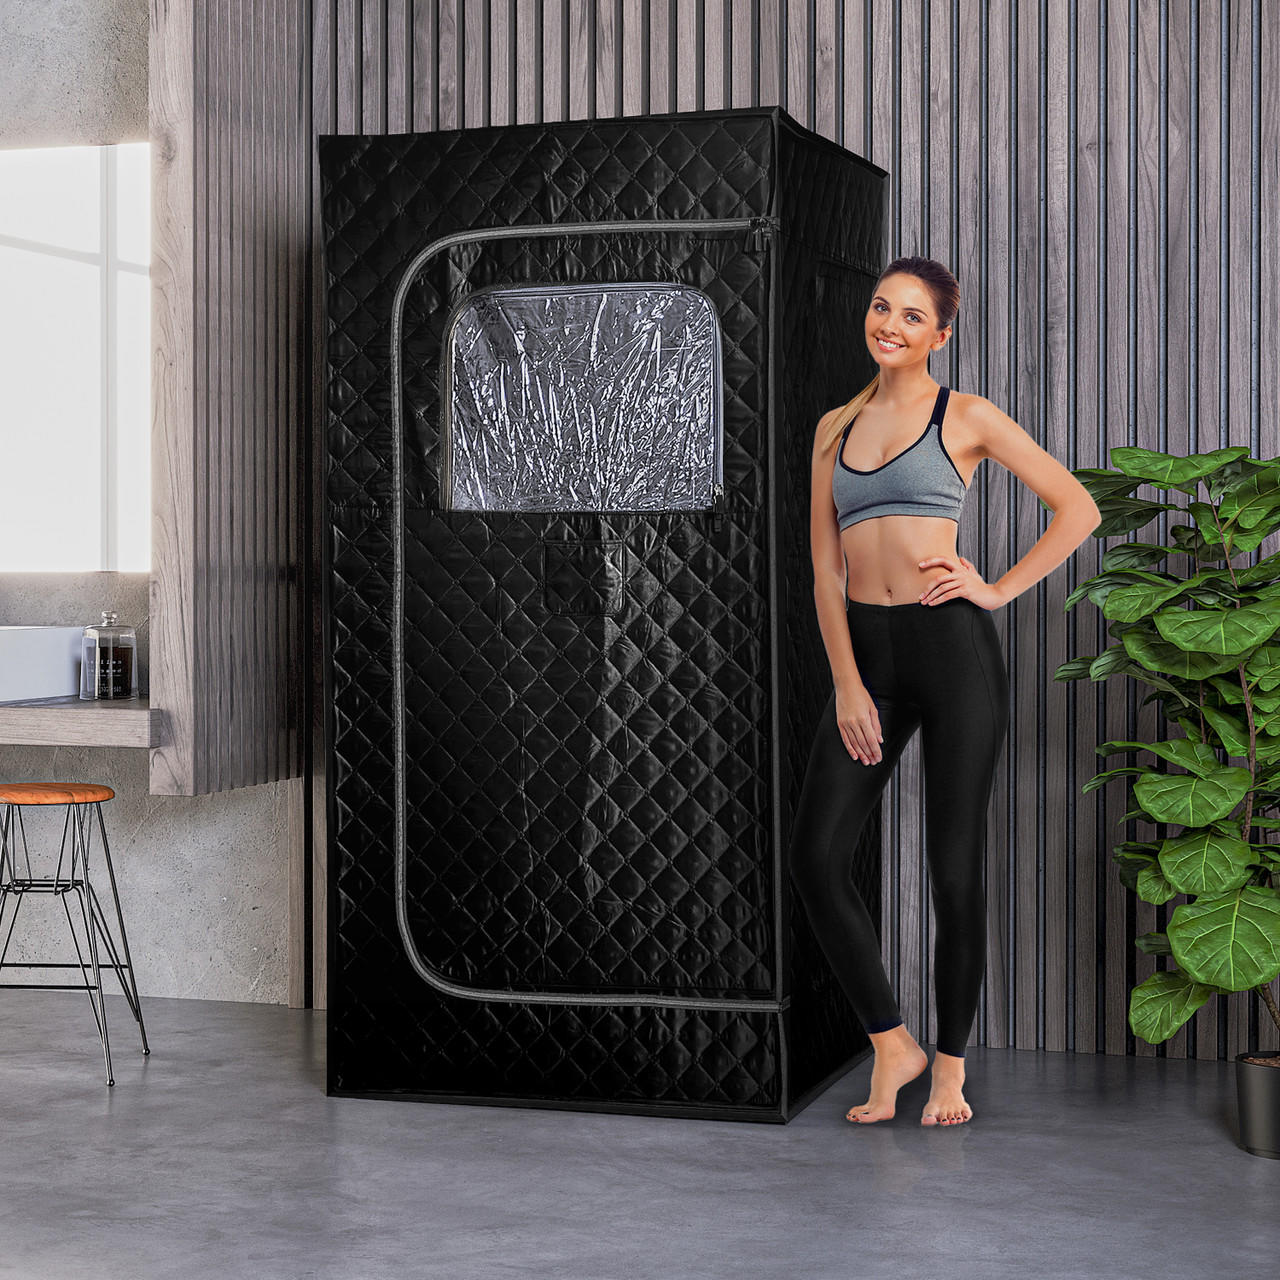 Full Size Portable Black Steam Sauna tent–Personal Home Spa, with